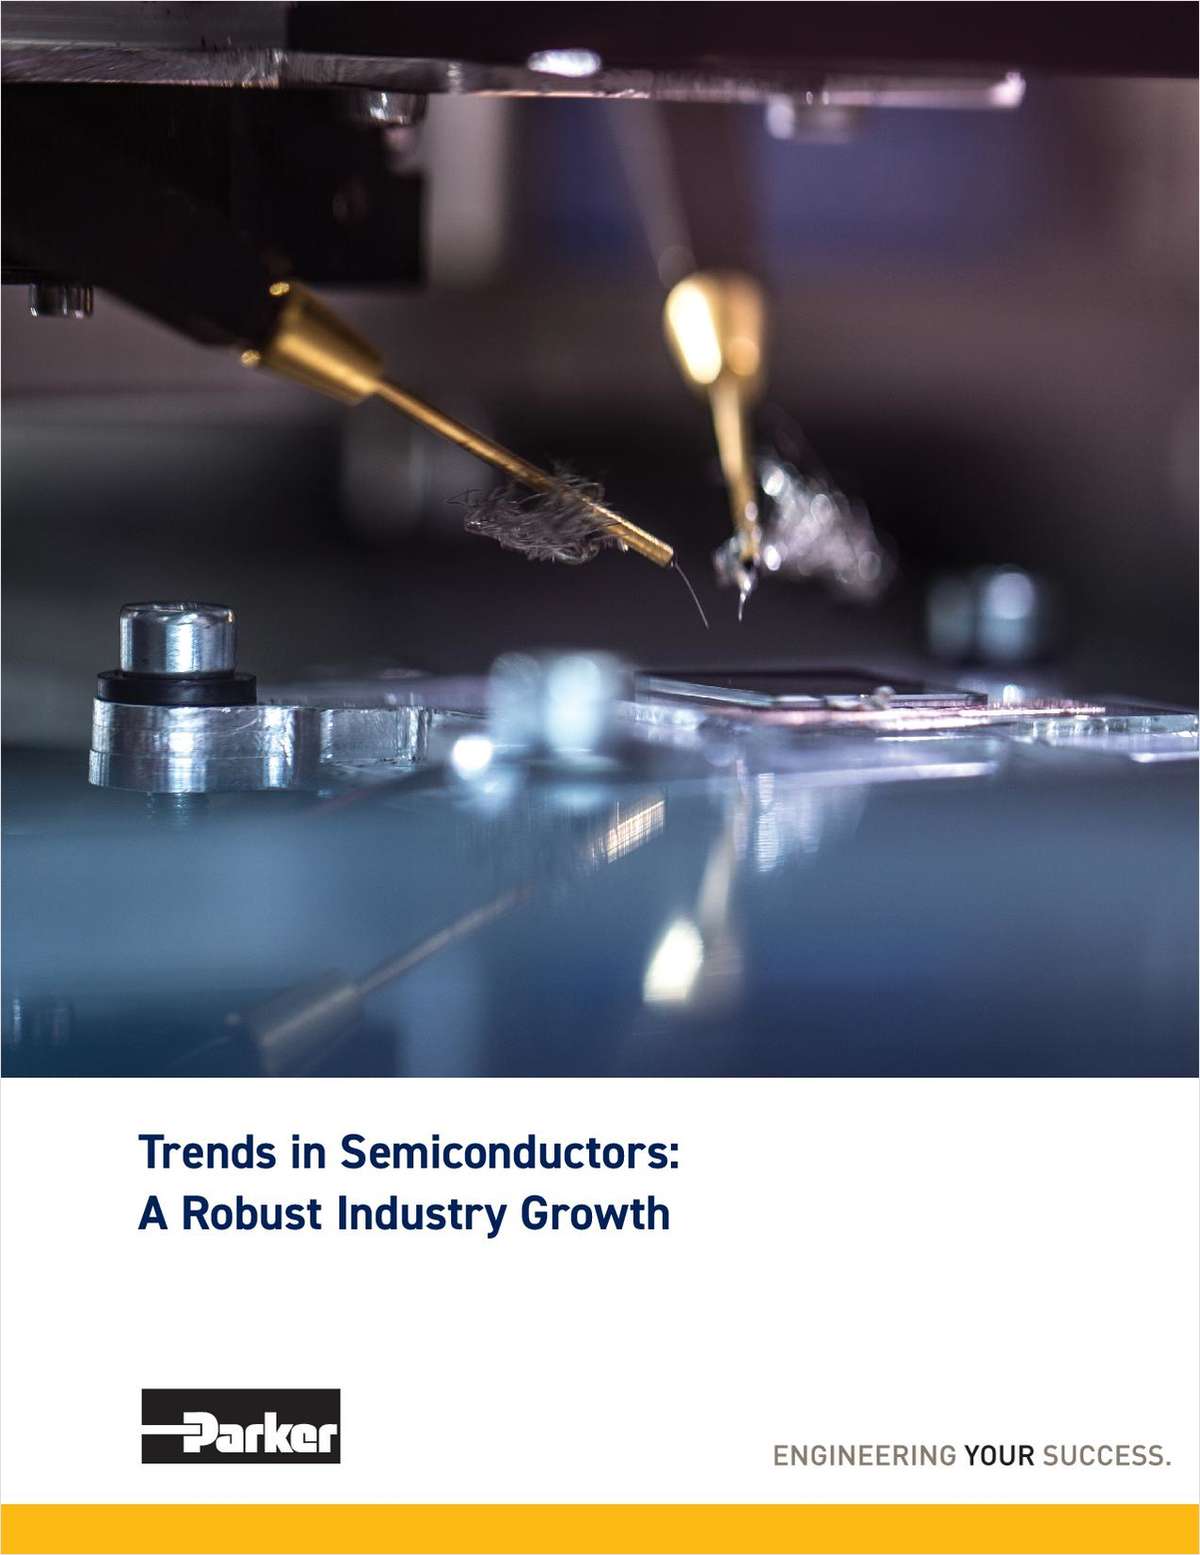 Trends in Semiconductors Point to Robust Industry Growth